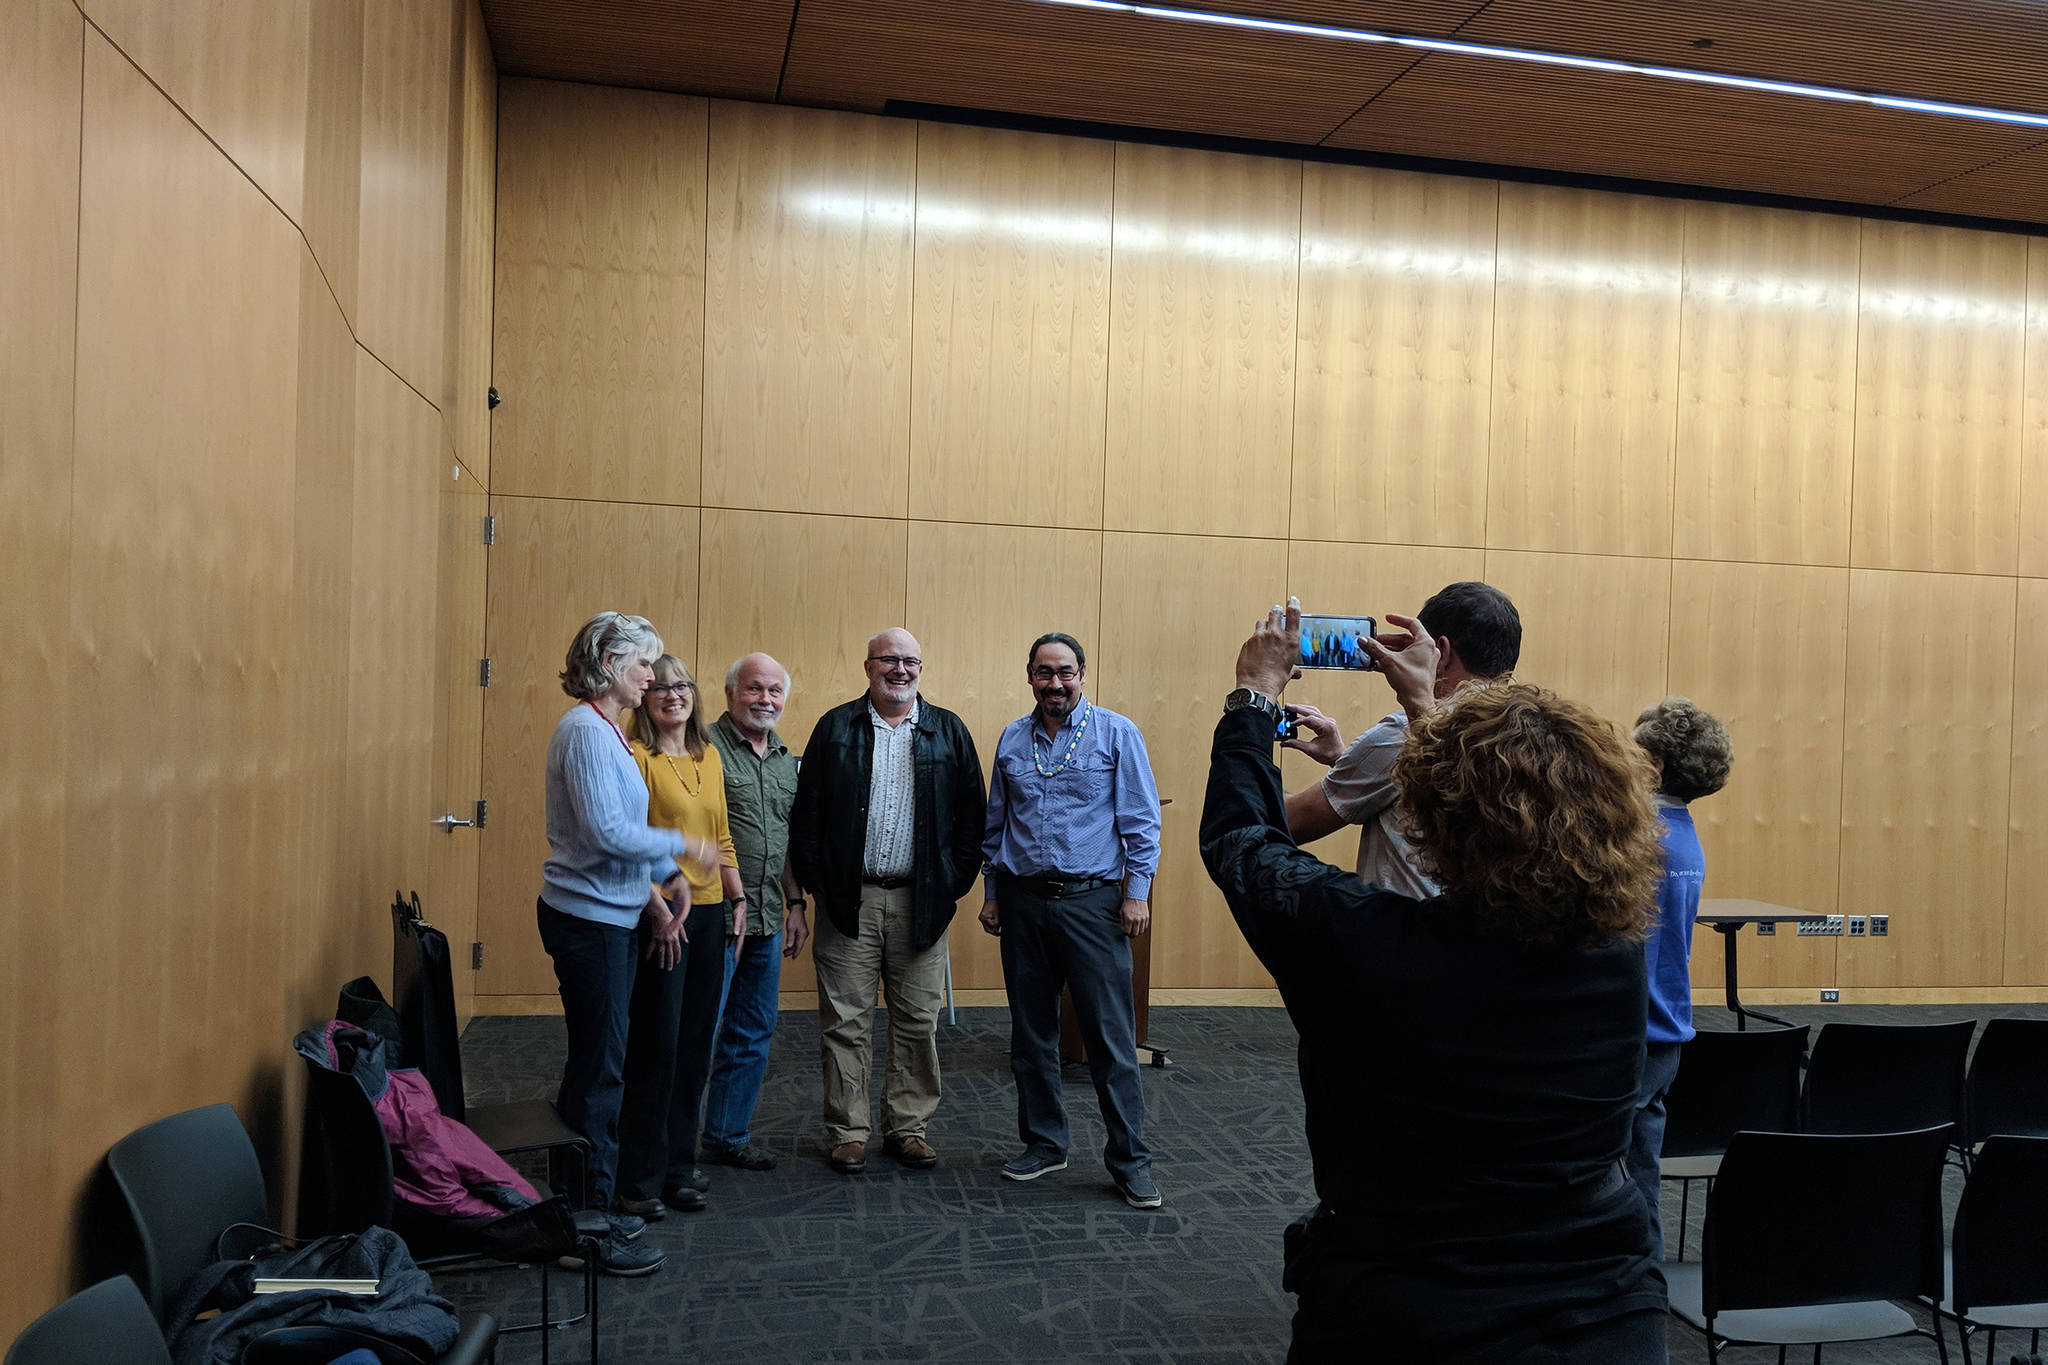 After each person read from their works and answered questions, Susi Gregg Fowler and illustrator Jim Fowler, Ishmael Hope, John Straley and Heather Lende posed for a group photo. Fans decided to capture the moment, too. (Ben Hohenstatt | Capital City Weekly)